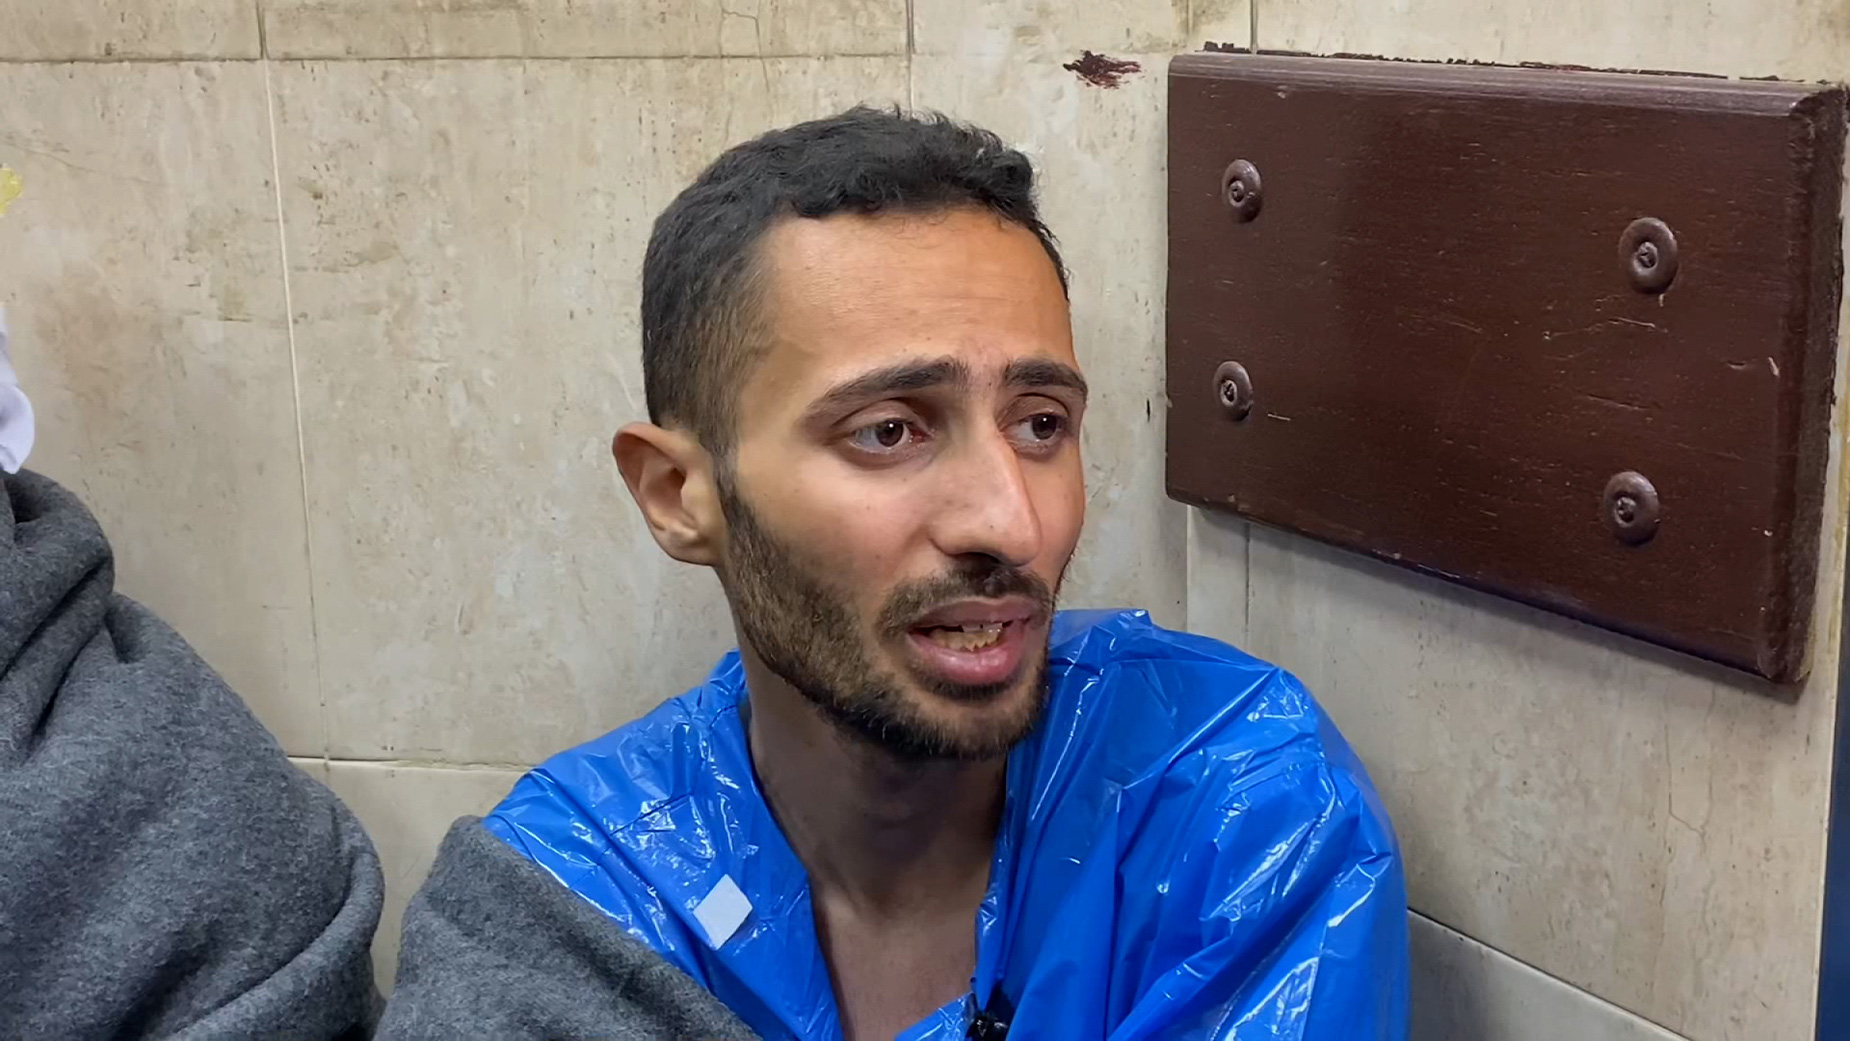 Mohammad Mershid, 25, pictured in Al-Aqsa Martyrs Hospital, in central Gaza, says he was detained and tortured by the Israeli military, during an ongoing raid near Al-Shifa Hospital, in the north.